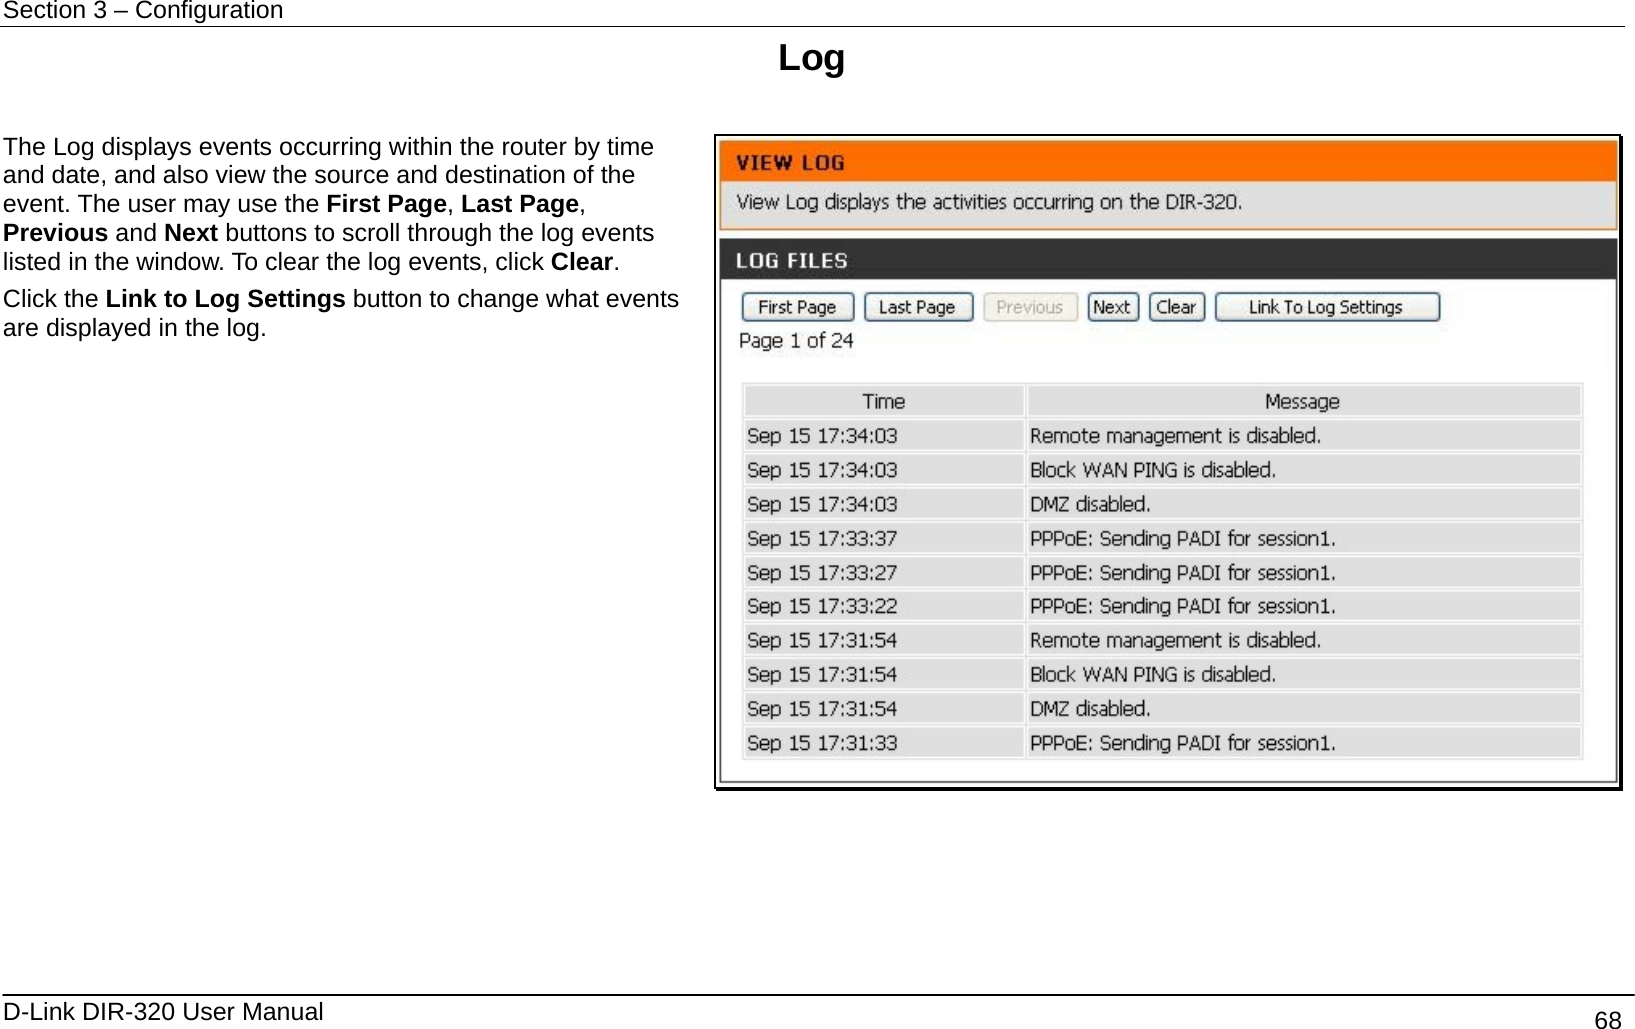 Section 3 – Configuration   D-Link DIR-320 User Manual                                       68 Log  The Log displays events occurring within the router by time and date, and also view the source and destination of the event. The user may use the First Page, Last Page, Previous and Next buttons to scroll through the log events listed in the window. To clear the log events, click Clear. Click the Link to Log Settings button to change what events are displayed in the log.      